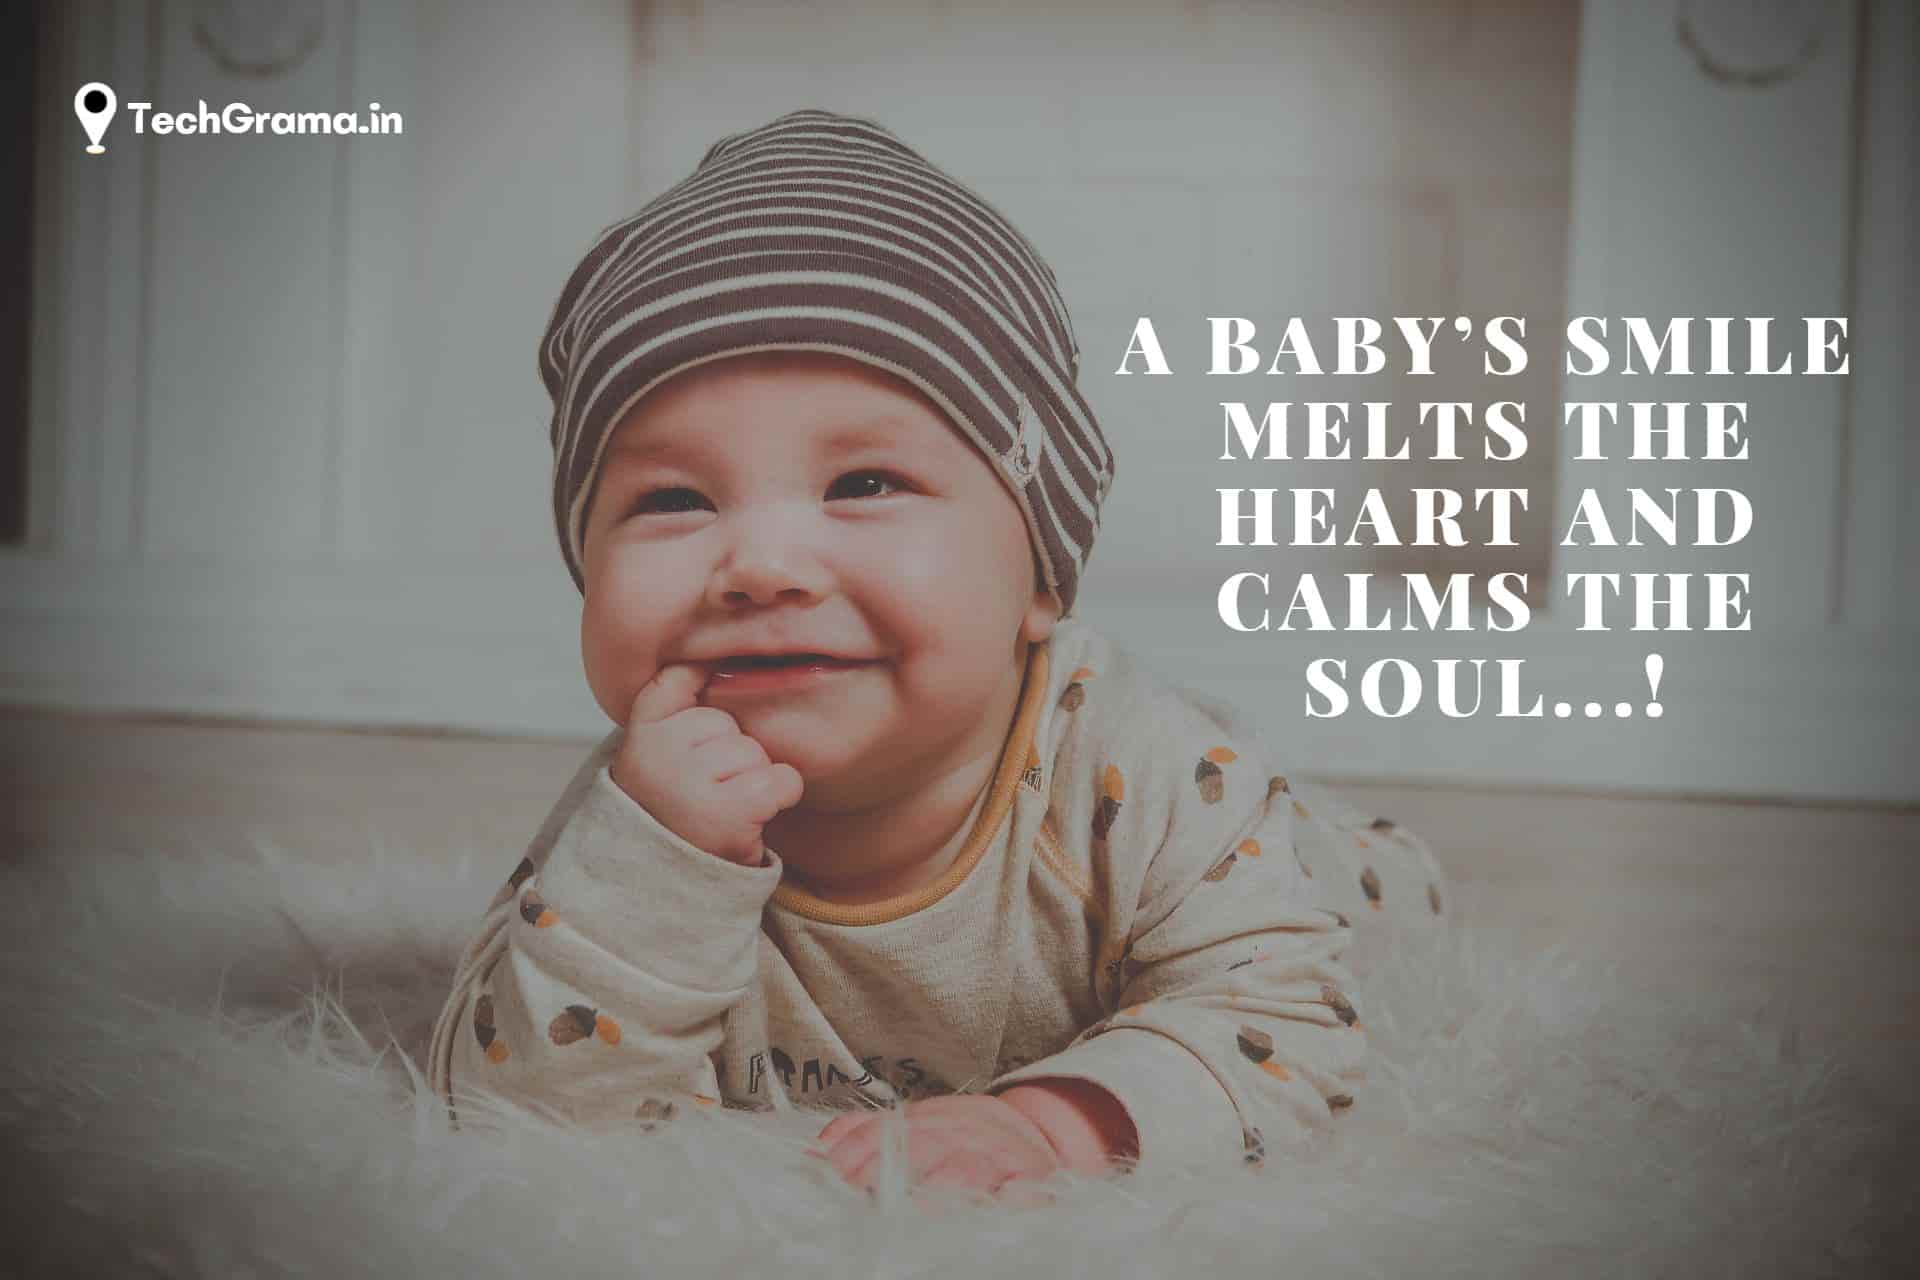 Best Smile Quotes For Baby, Priceless Smile Quotes For Baby, Love Quotes For Baby Smiles, Baby Smile Quotes For Instagram, Smile Quotes For Baby Girls & Boys, Beautiful Smile Quotes For Baby Girls, Baby Boy Smile Quotes For Instagram, Cute Smile Baby Quotes, Quotes For Baby Girls & Boys Smile.